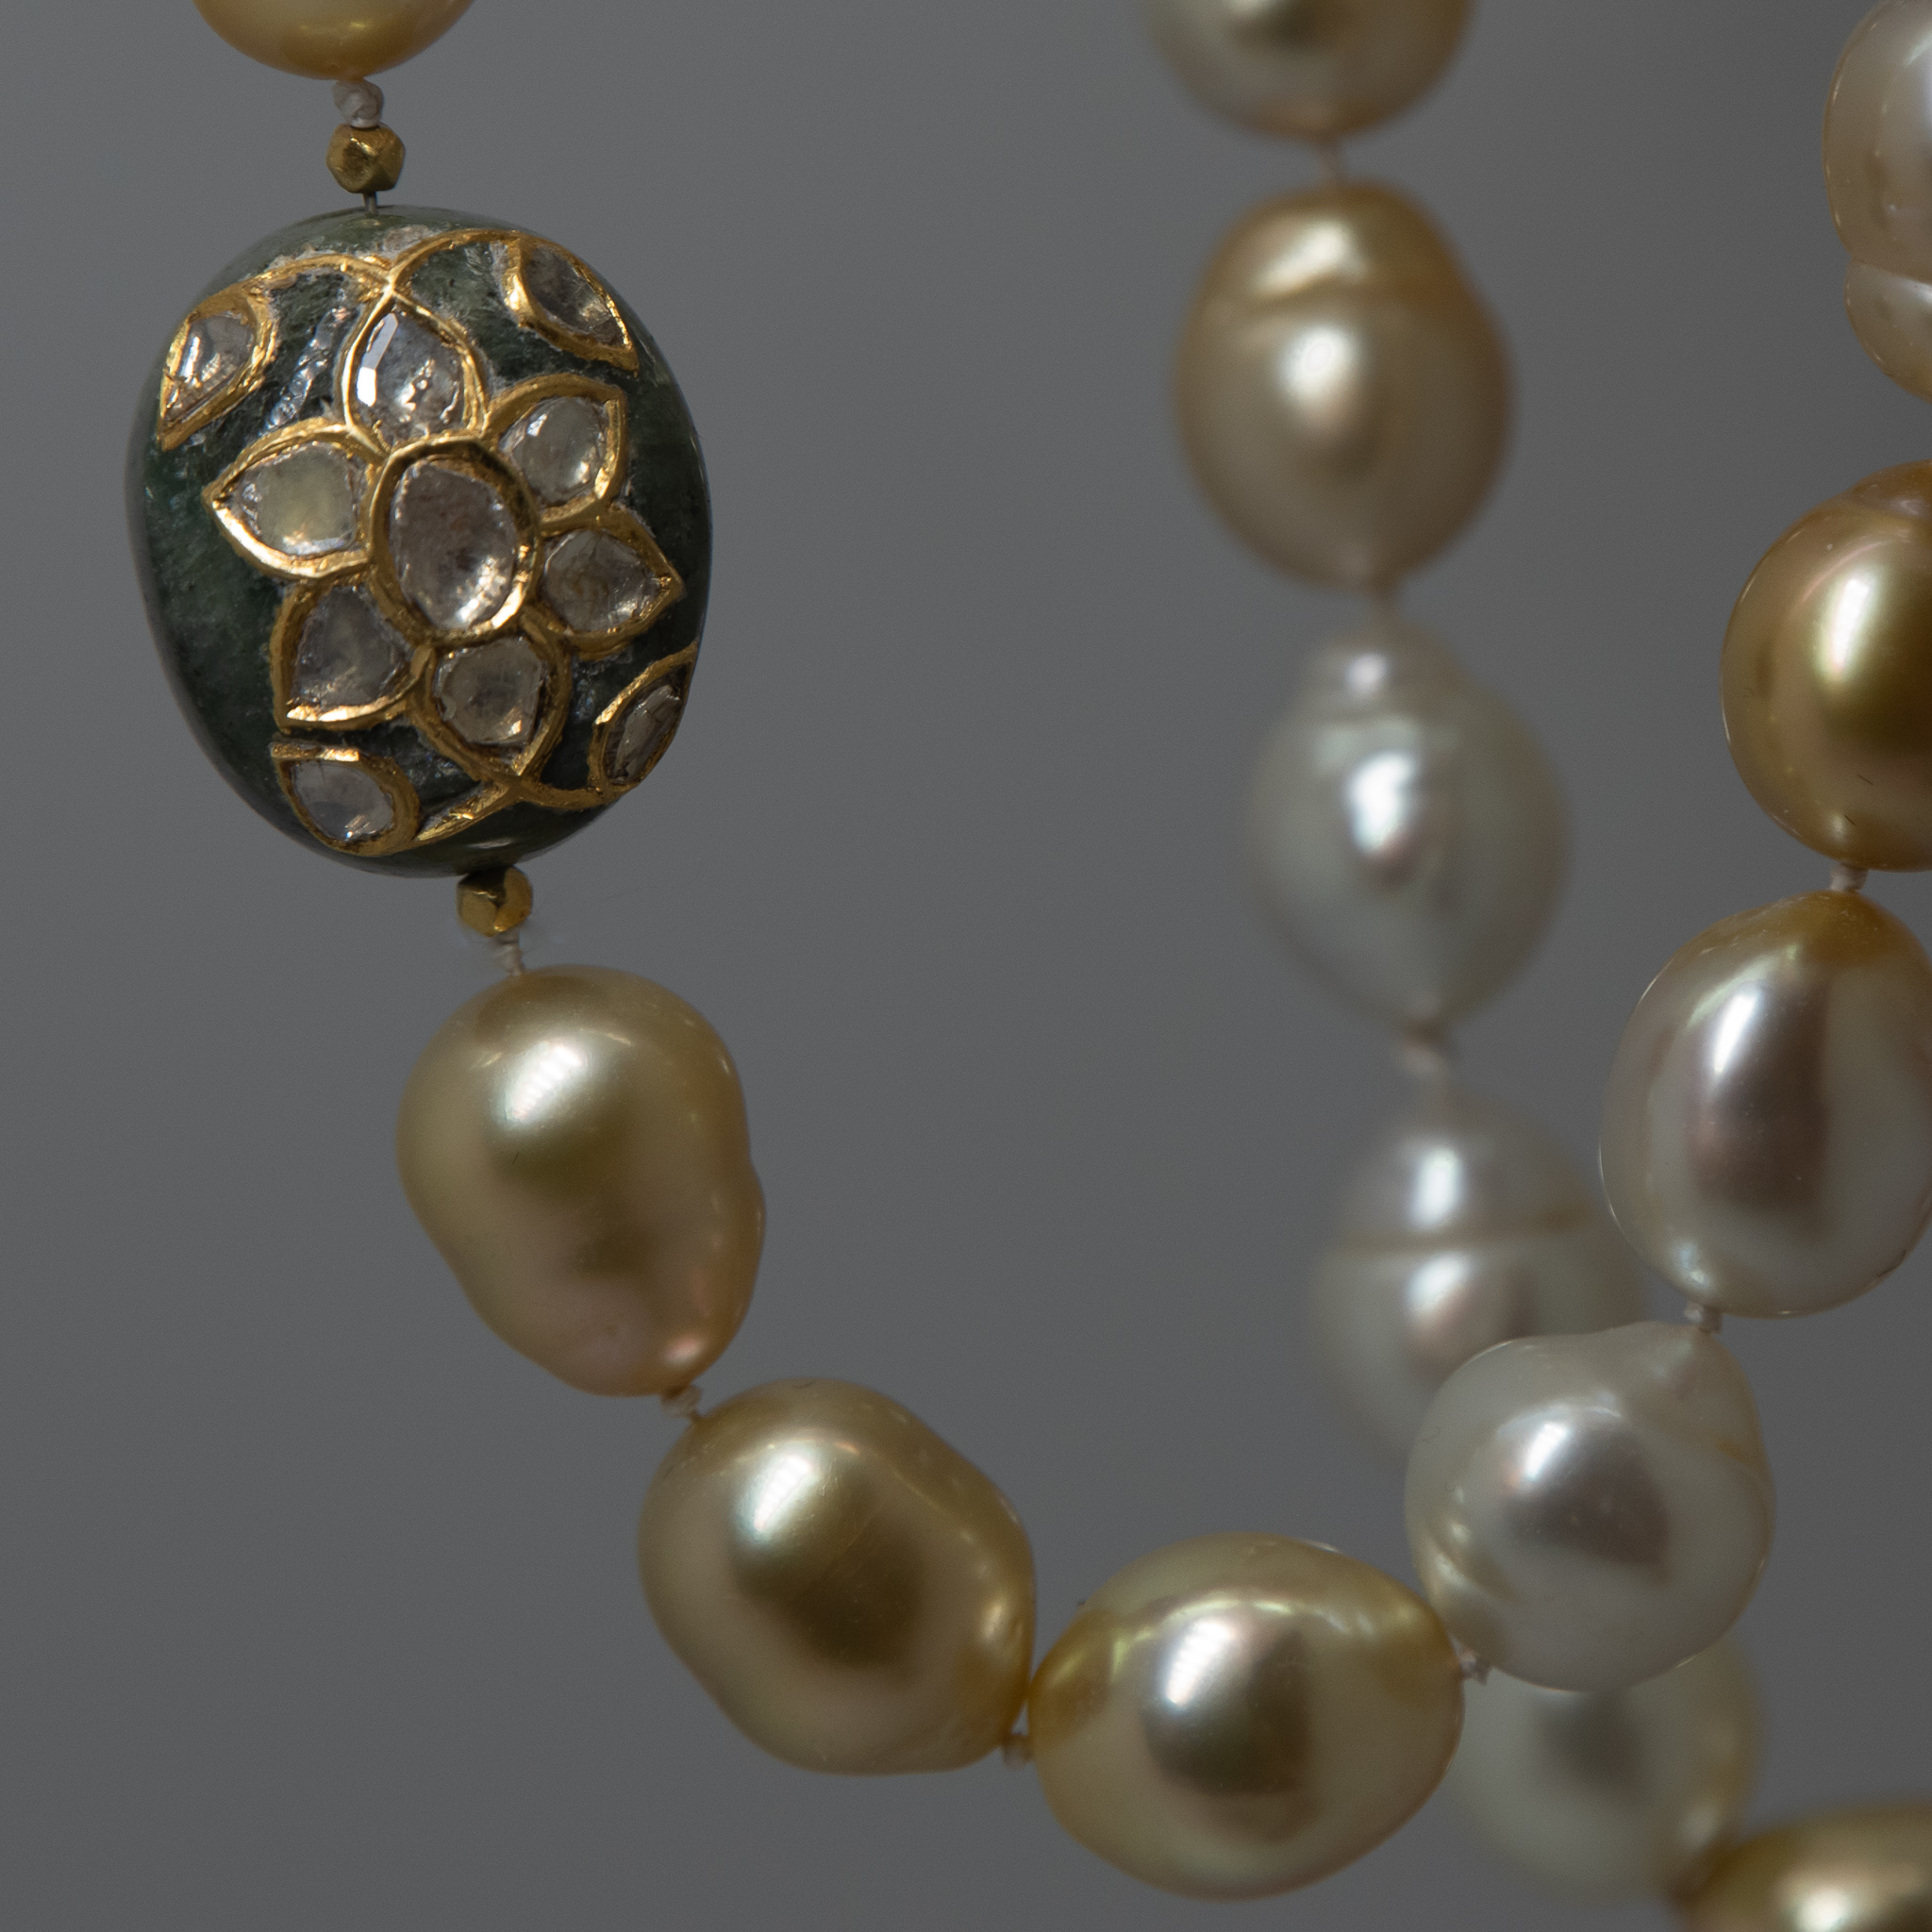 Philippine Golden South Sea Pearls with emerald clasp